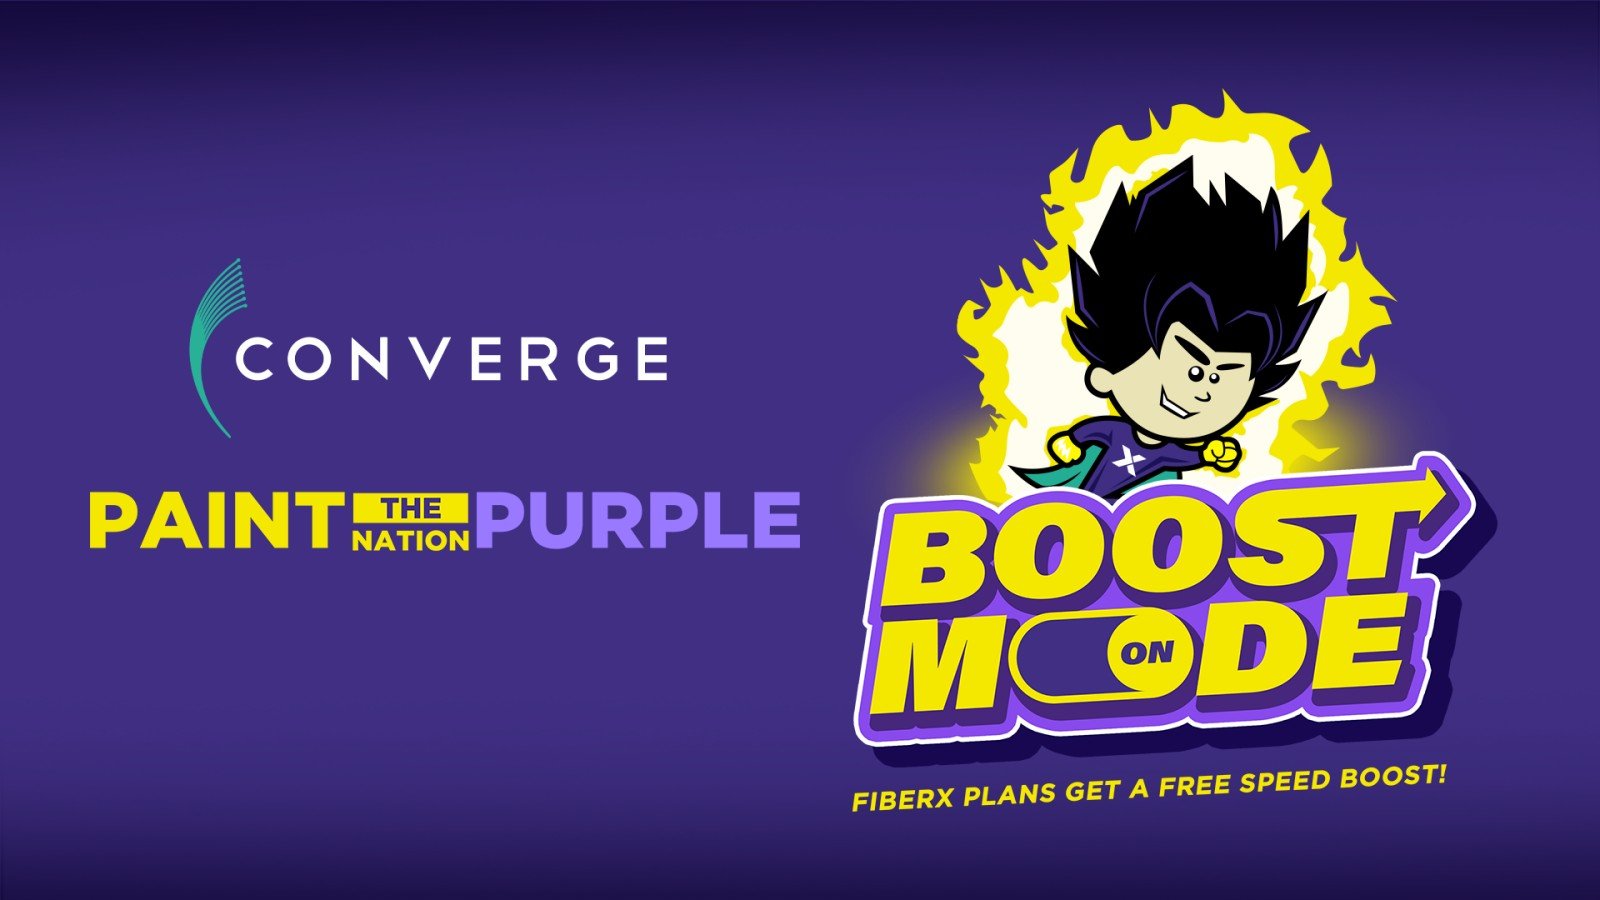 Converge Paints the Philippines Purple with Boosted Fiber Internet Plans